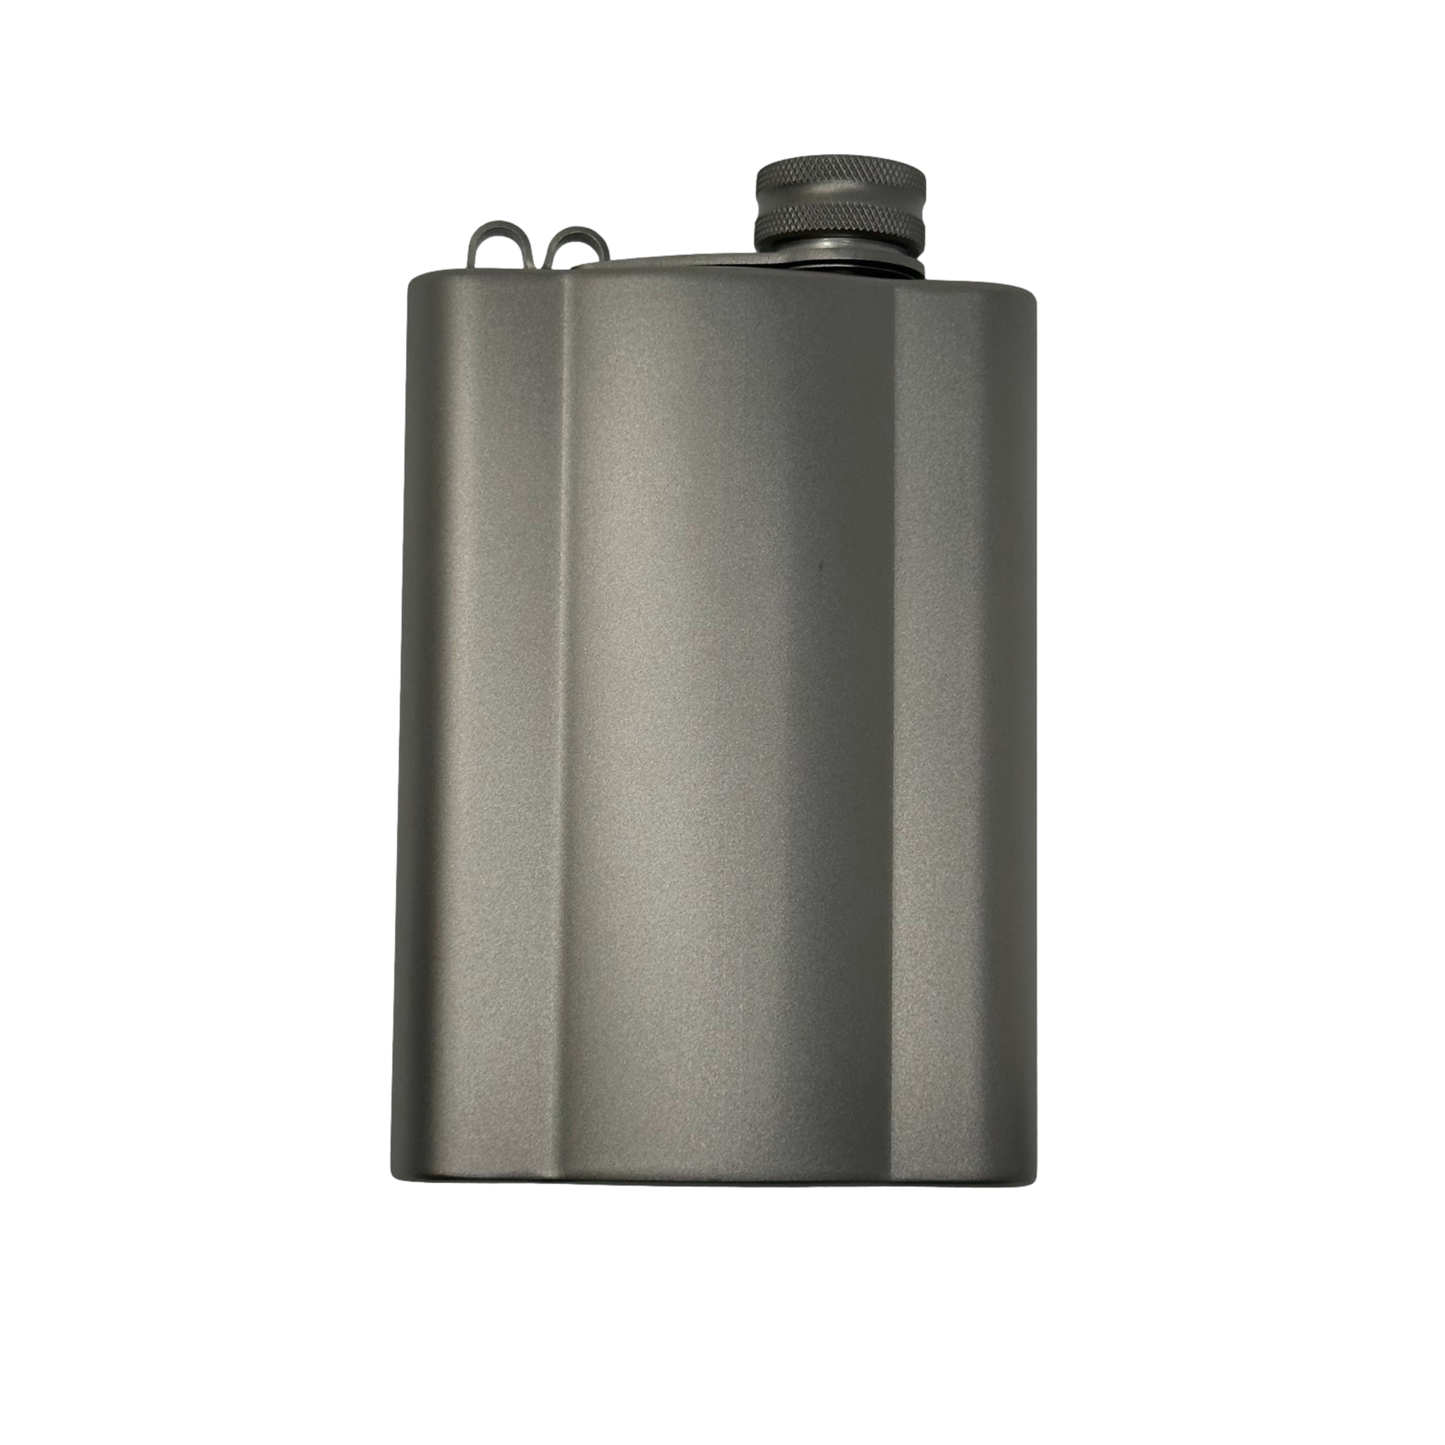 Valtcan Titanium Flask "Double Up" Canteen Military Design Fits into Canteen Front Pouch with Ti Funnel Ultralight